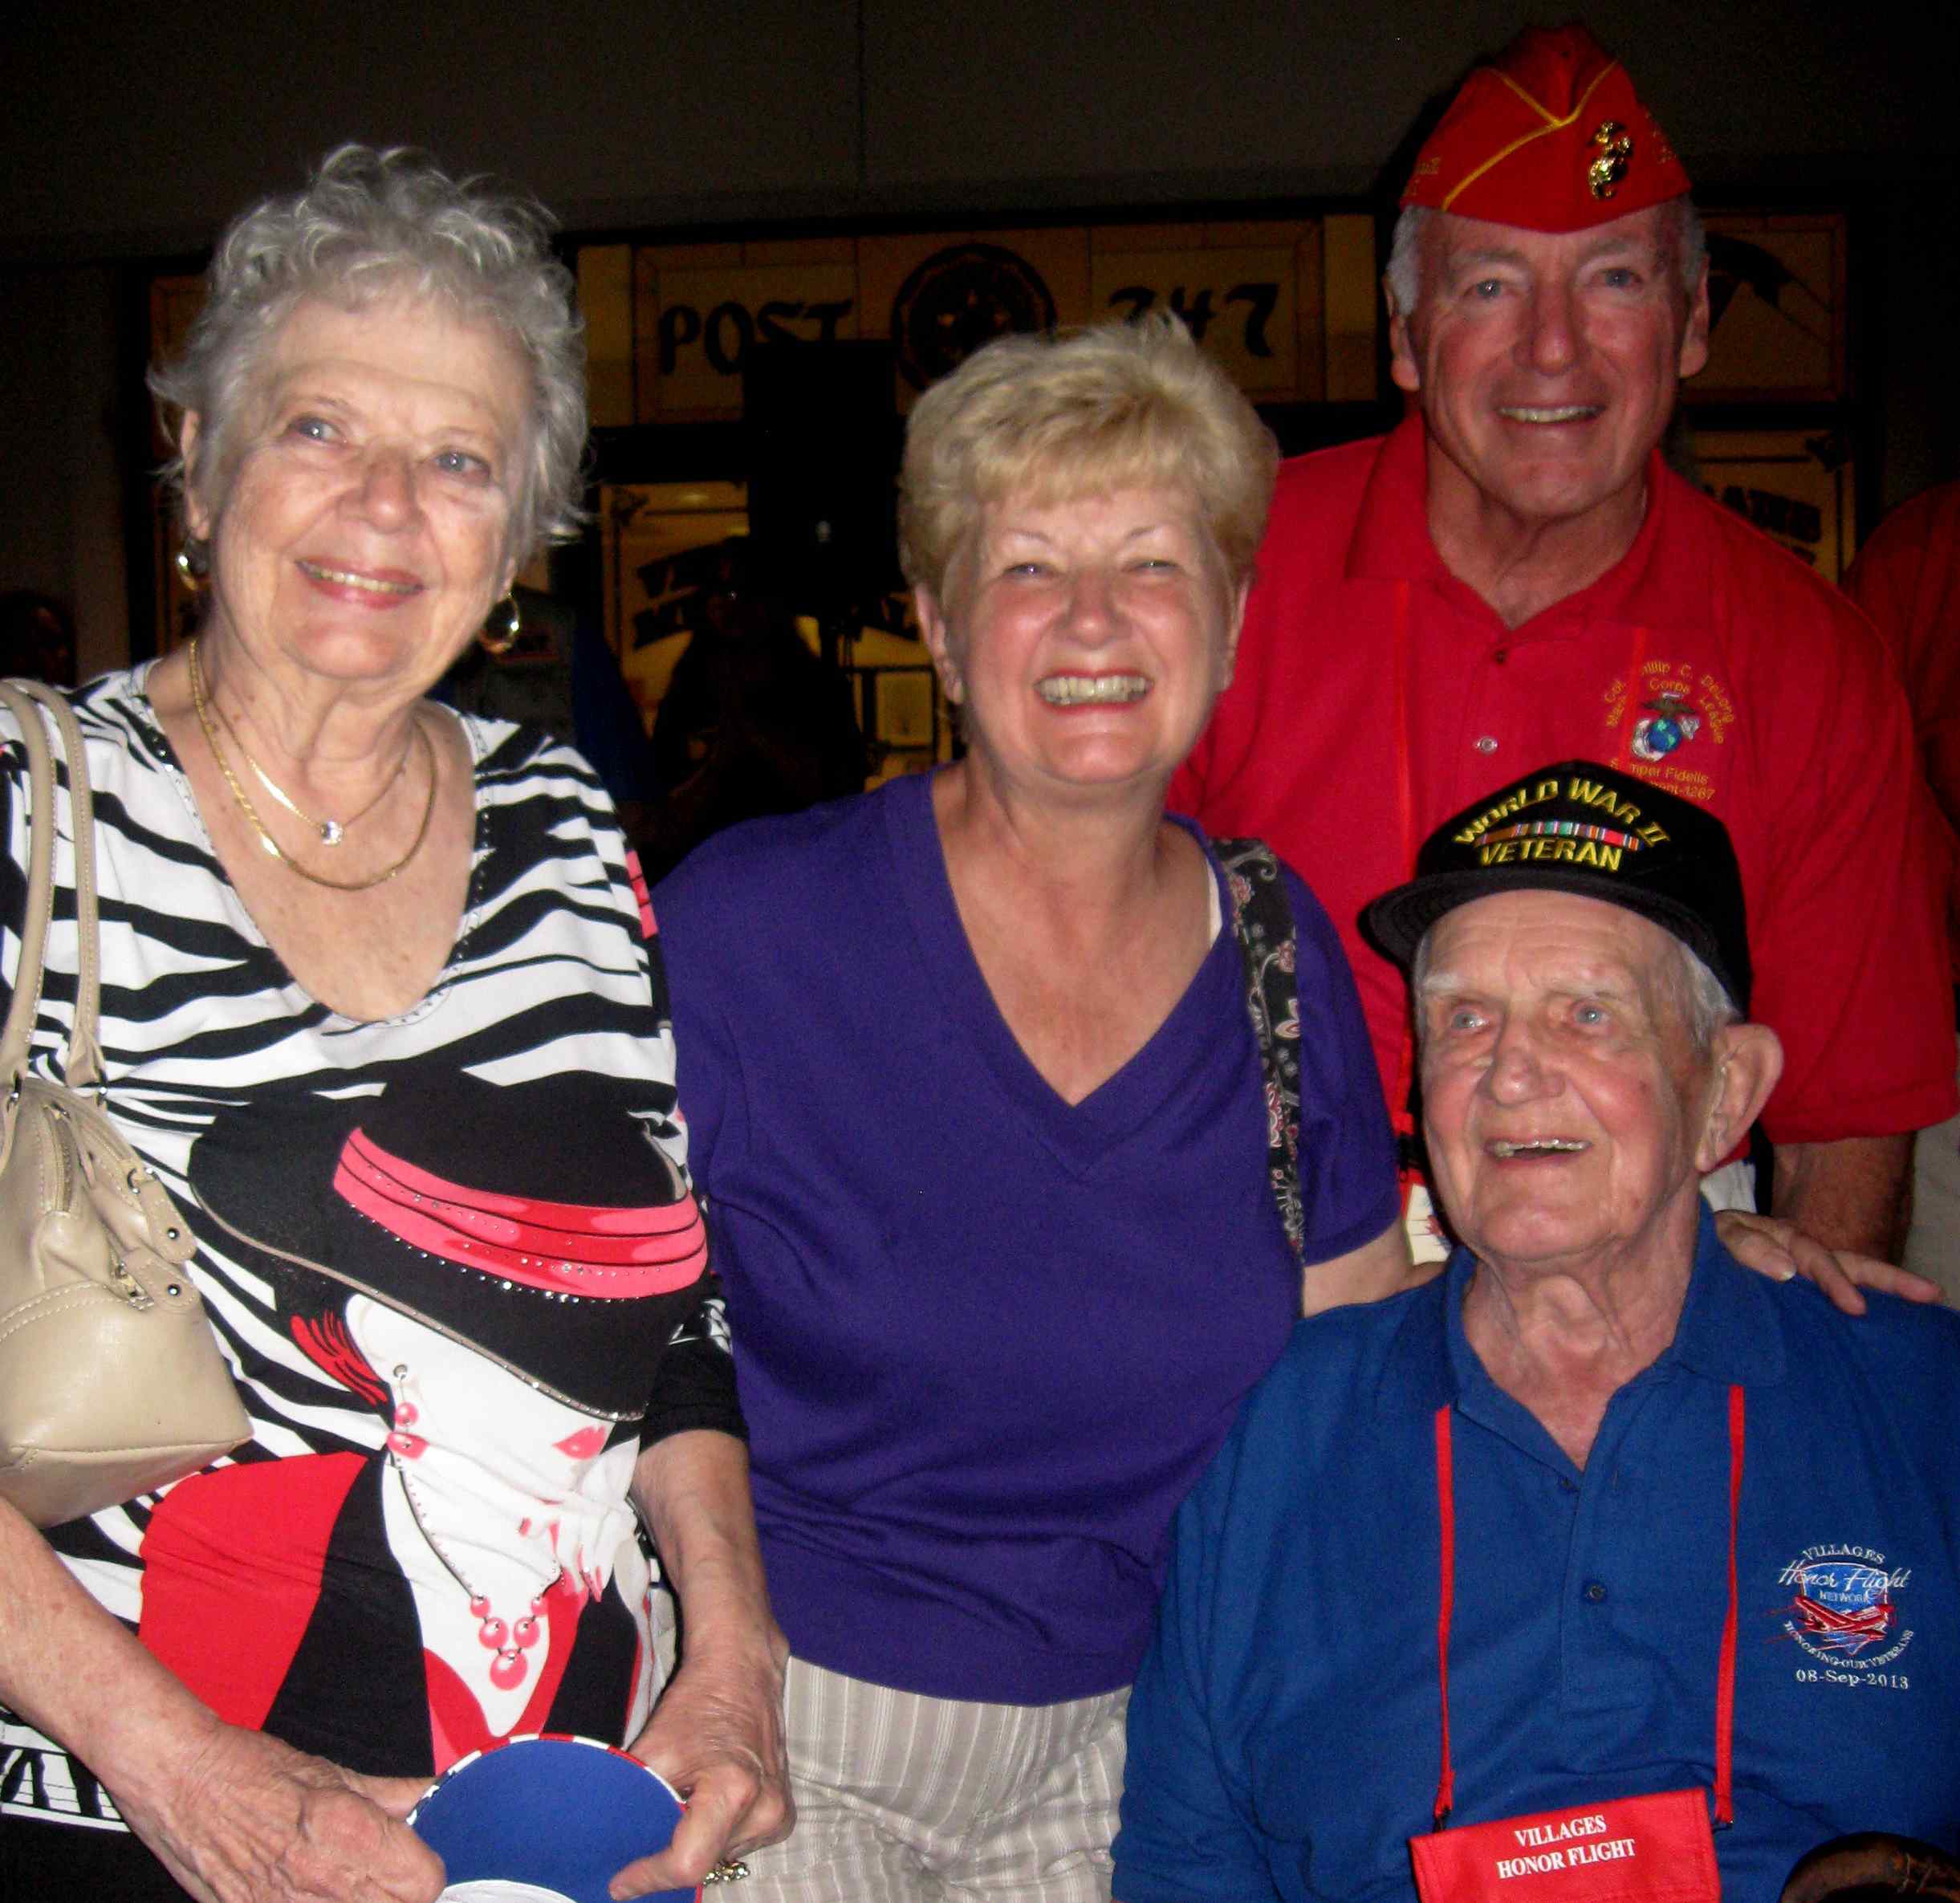 Next Villages Honor Flight scheduled to take off Oct. 5